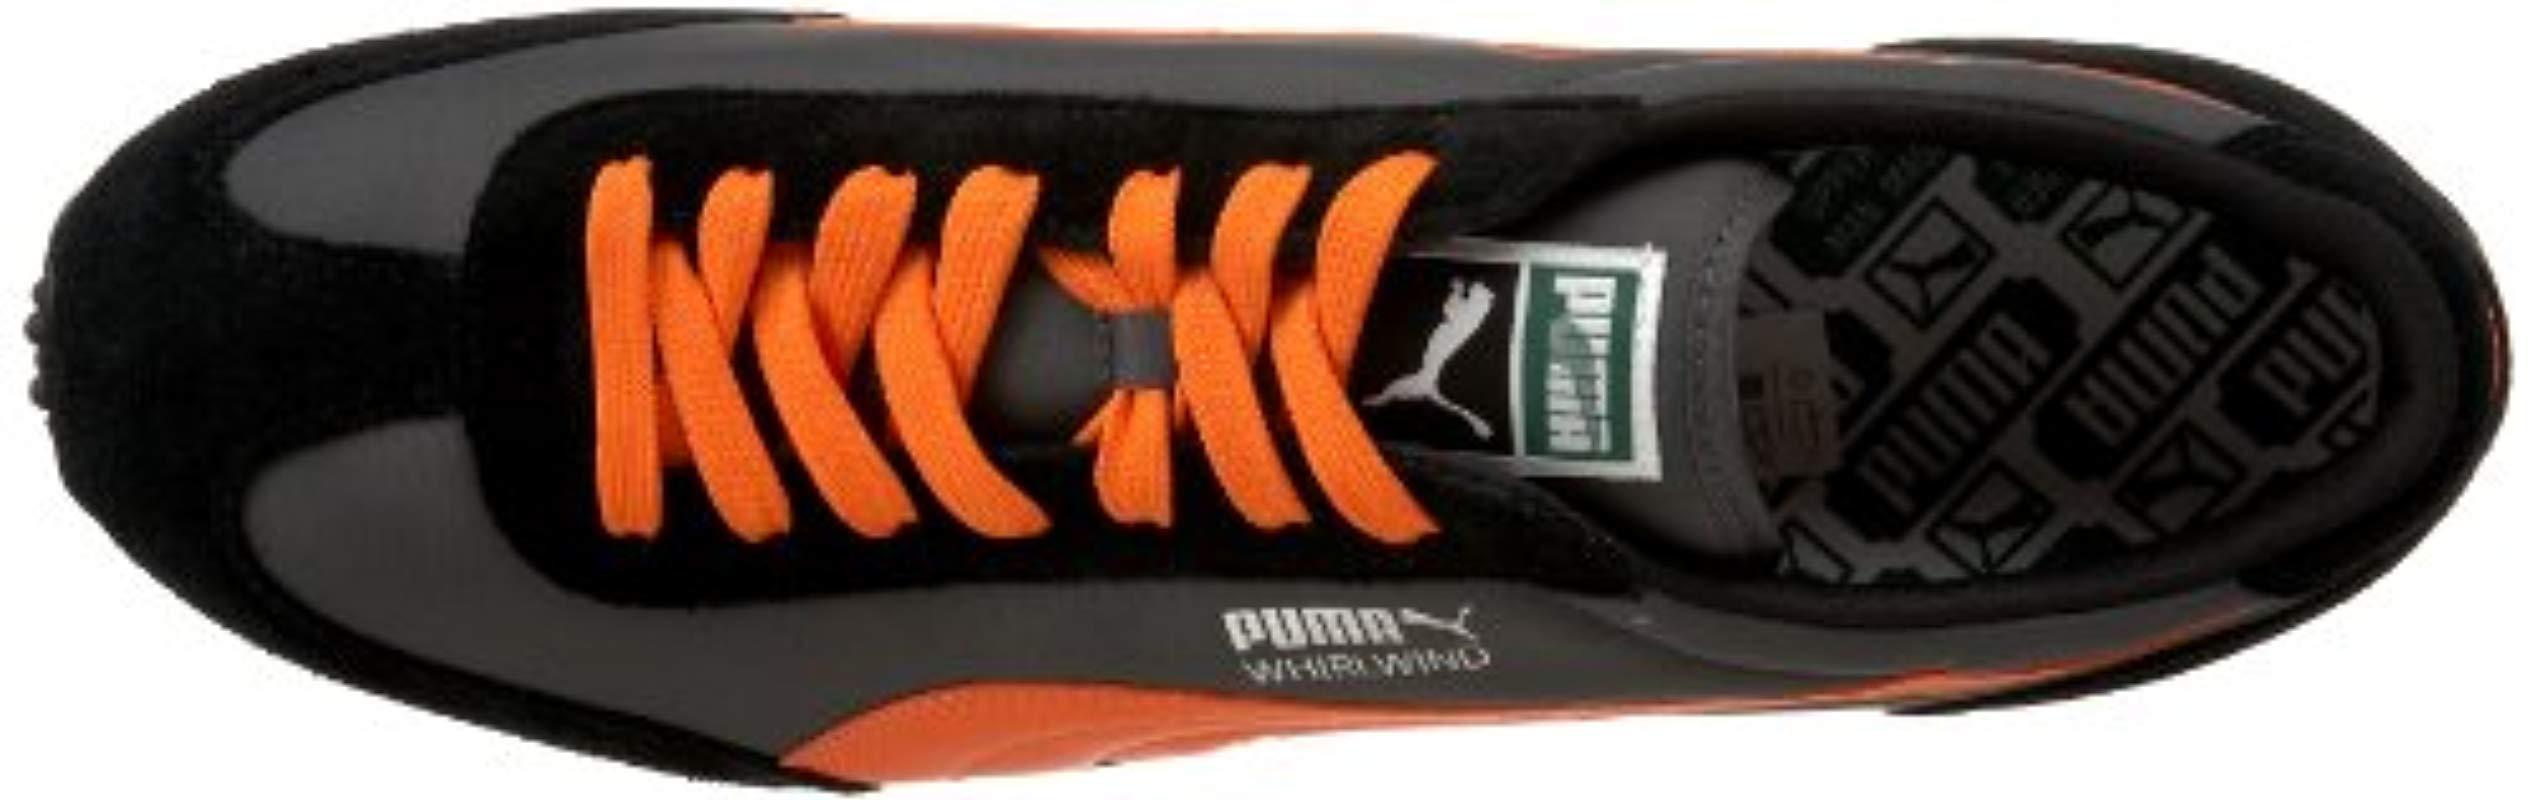 PUMA Synthetic Whirlwind Classic Sneaker in Orange for Men - Lyst